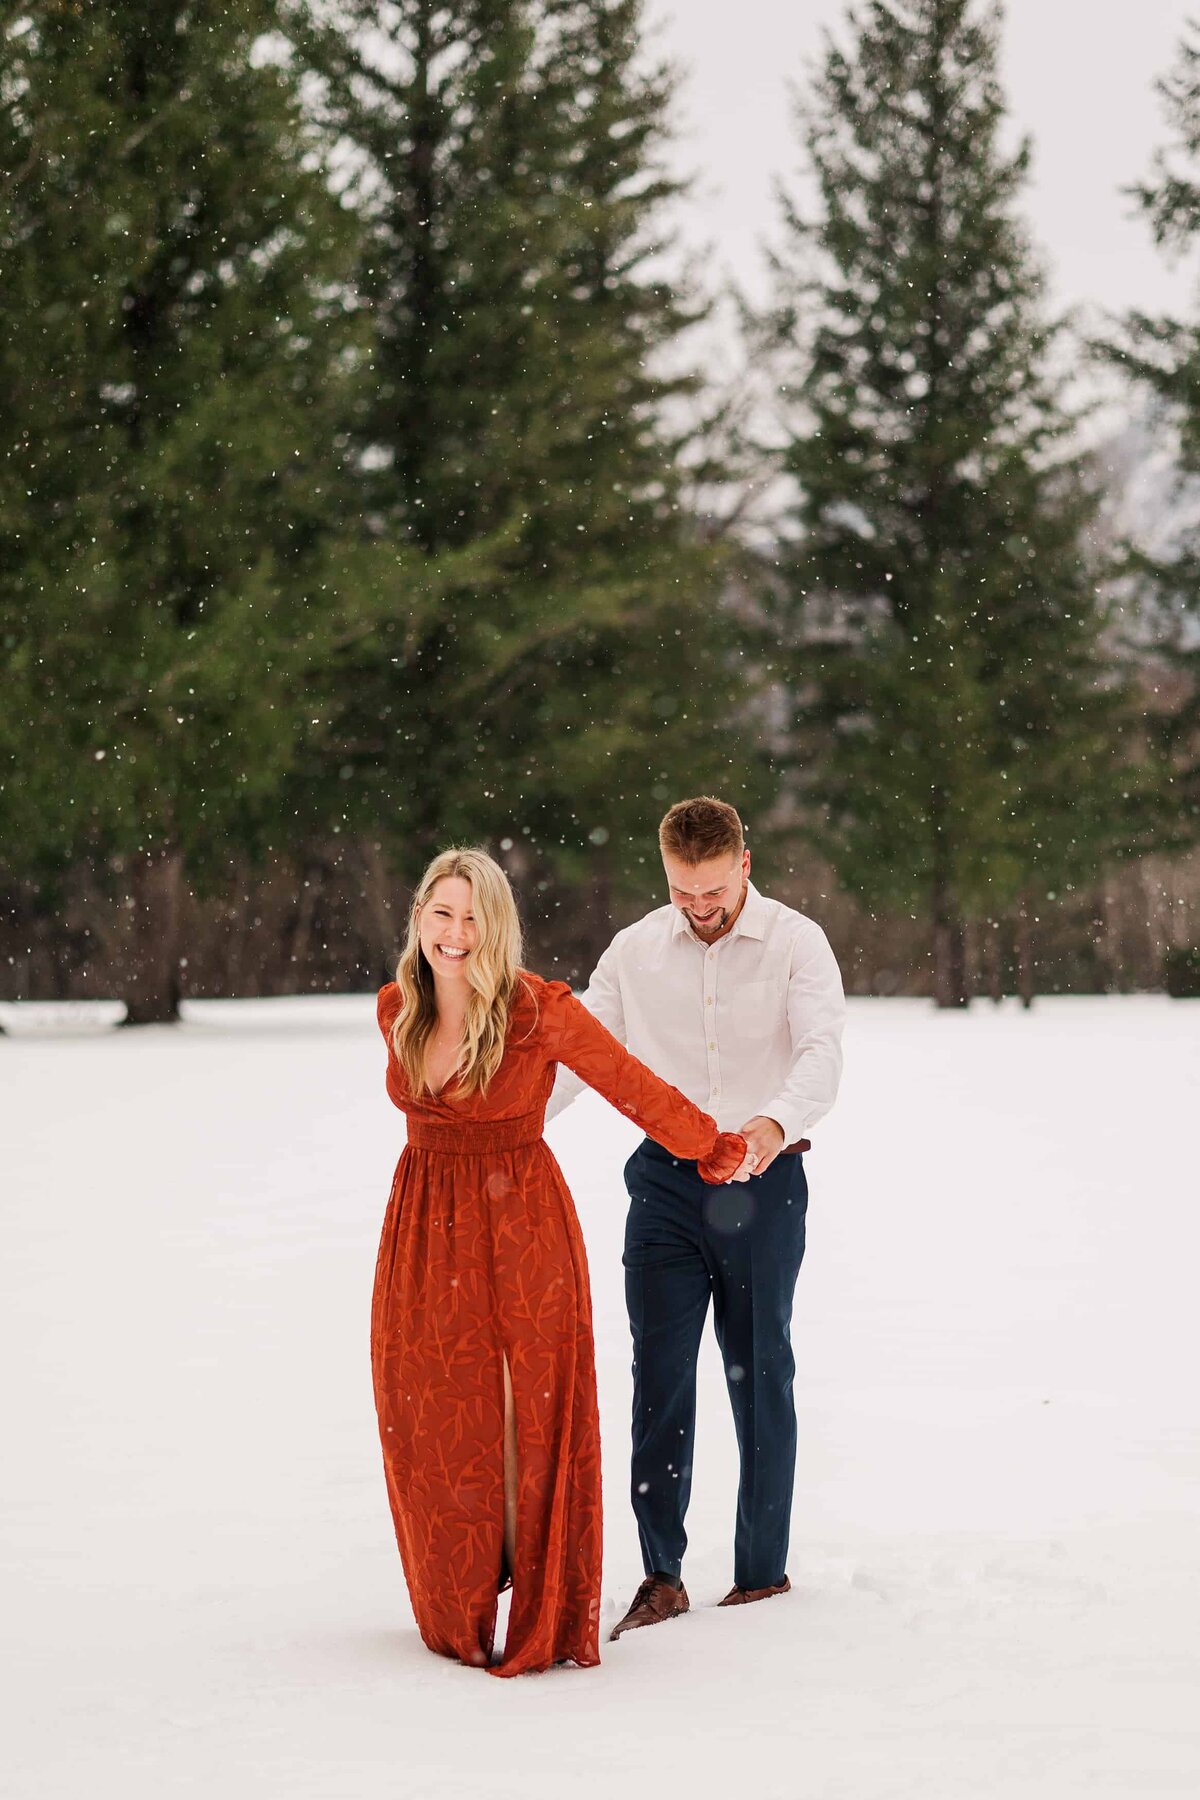 Snowy-Engagement-Meadowbrook-Farm-Northbend-WA-1226